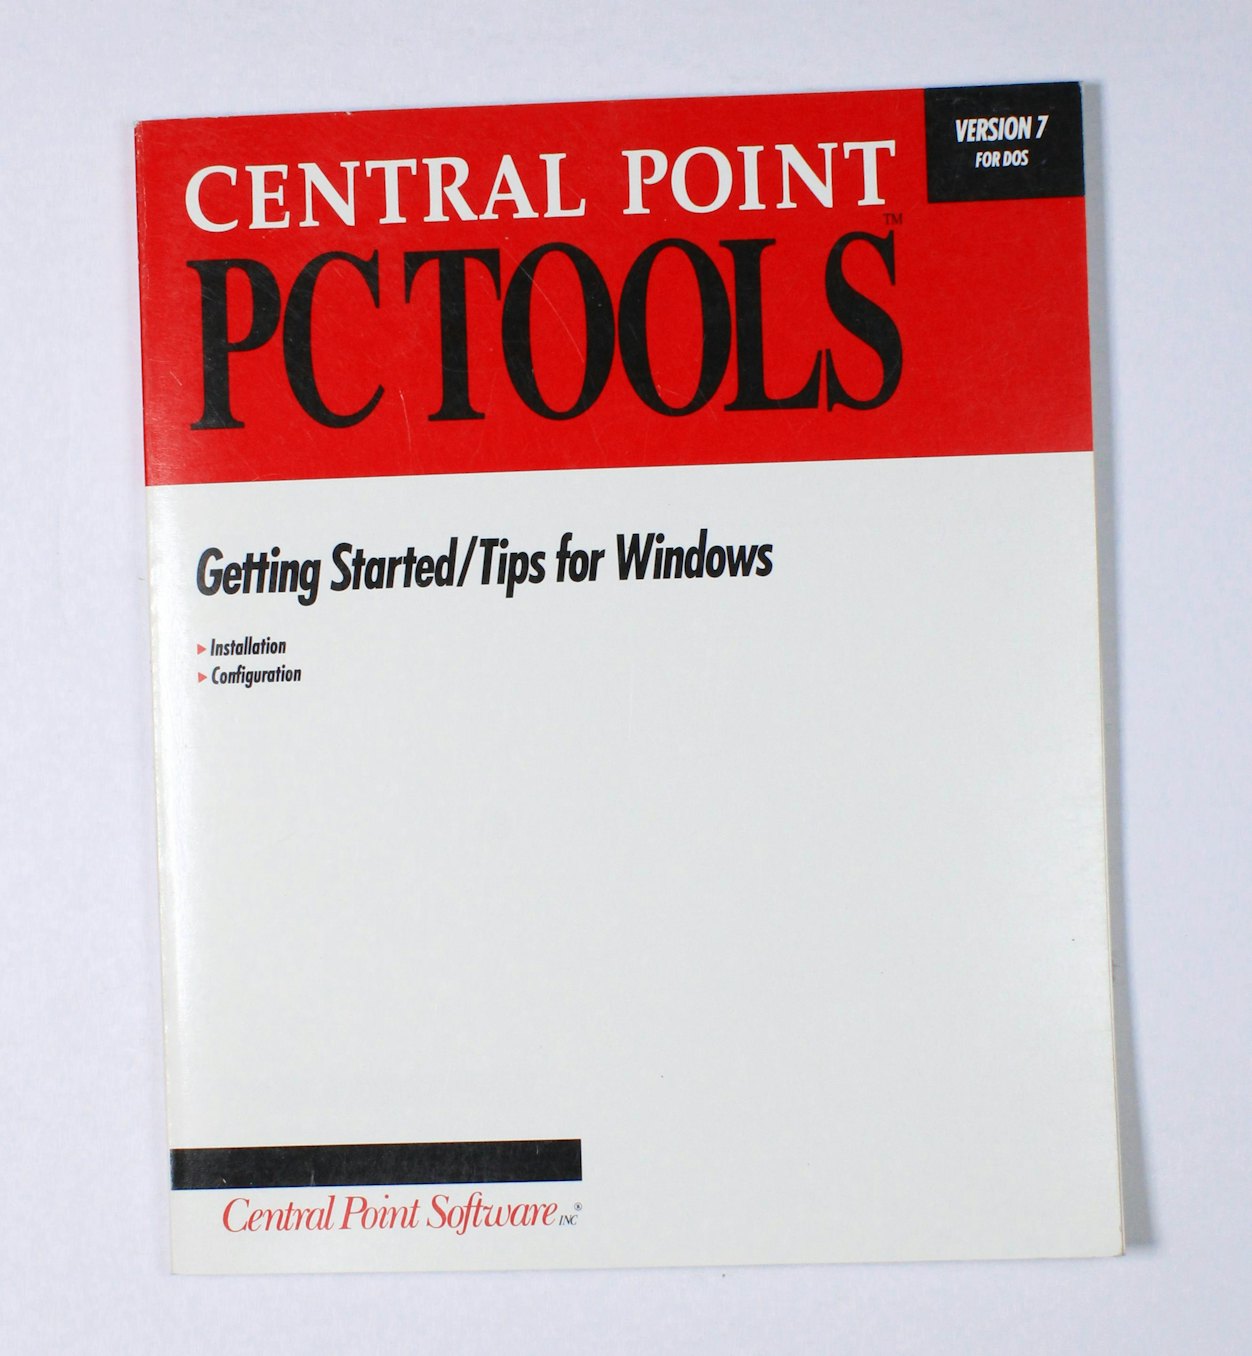 Central Point PC Tools: Getting Started/Tips for Windows